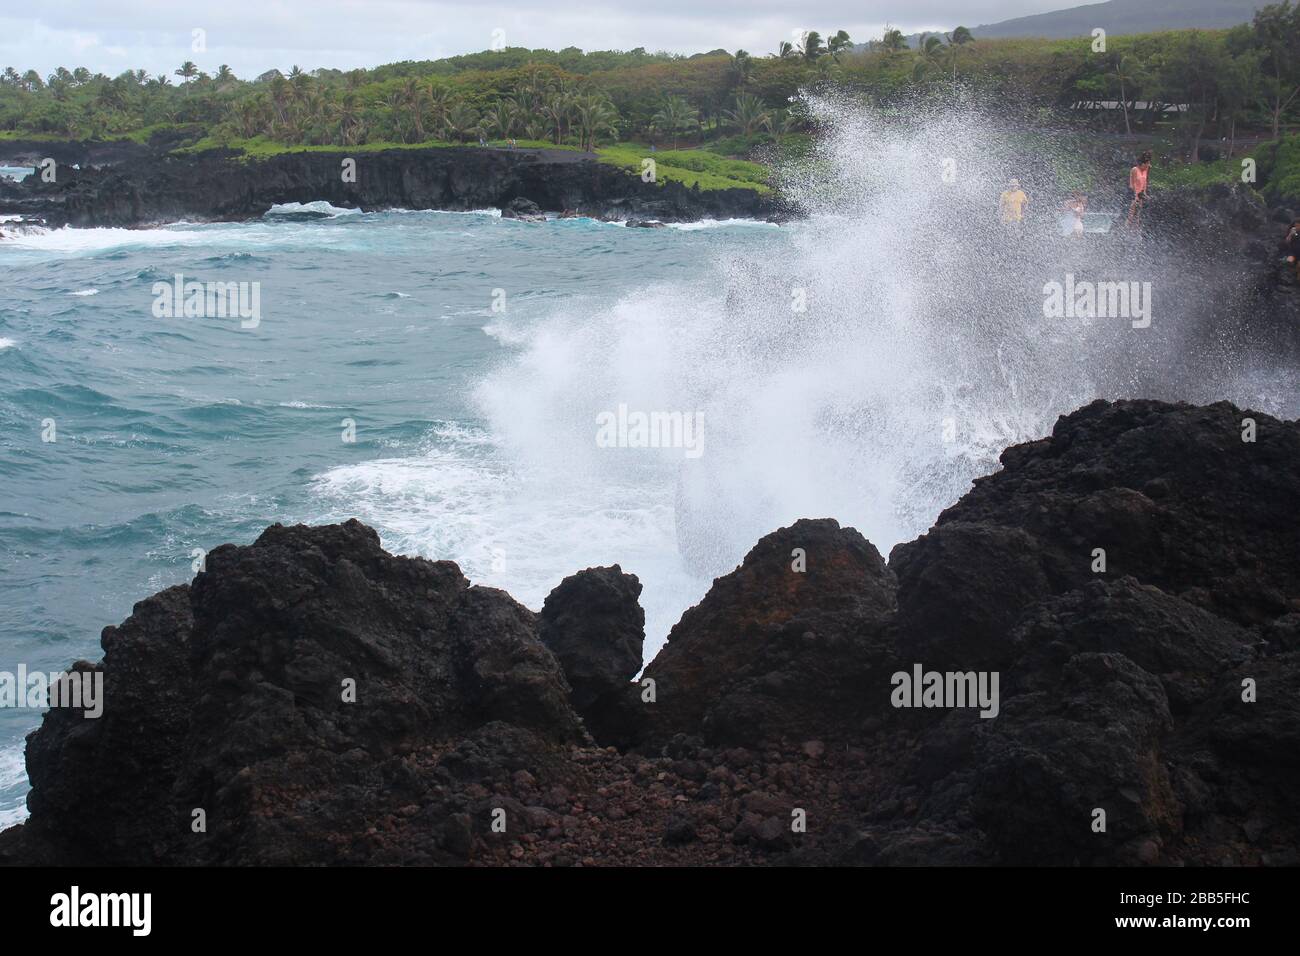 The sea spray from a wave in the Pacific Ocean crashing into volcanic rocks and soacking tourists at Waianapanapa State Park in Hana, Maui, Hawaii, US Stock Photo